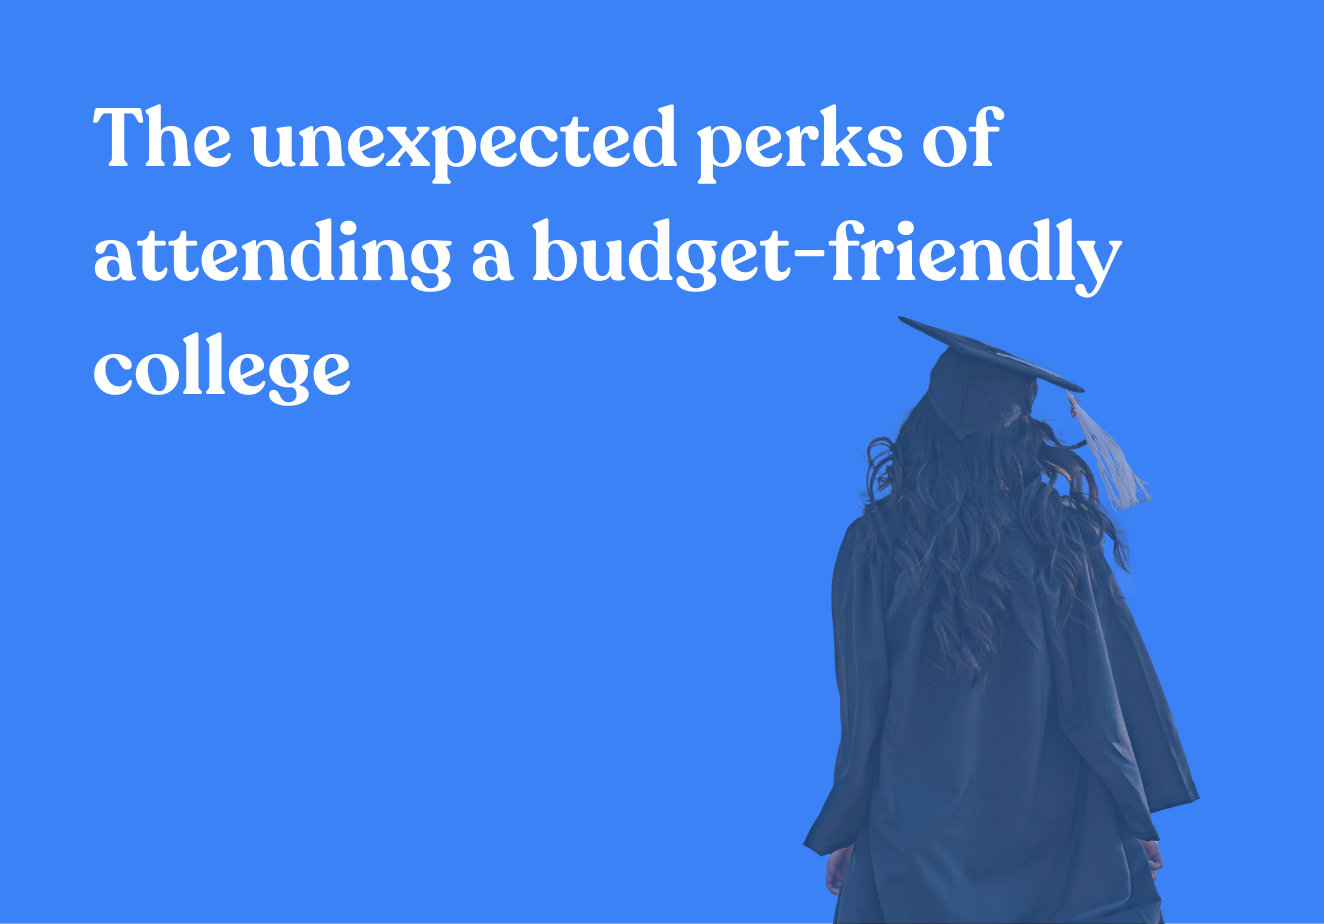 The unexpected perks of attending a budget-friendly college